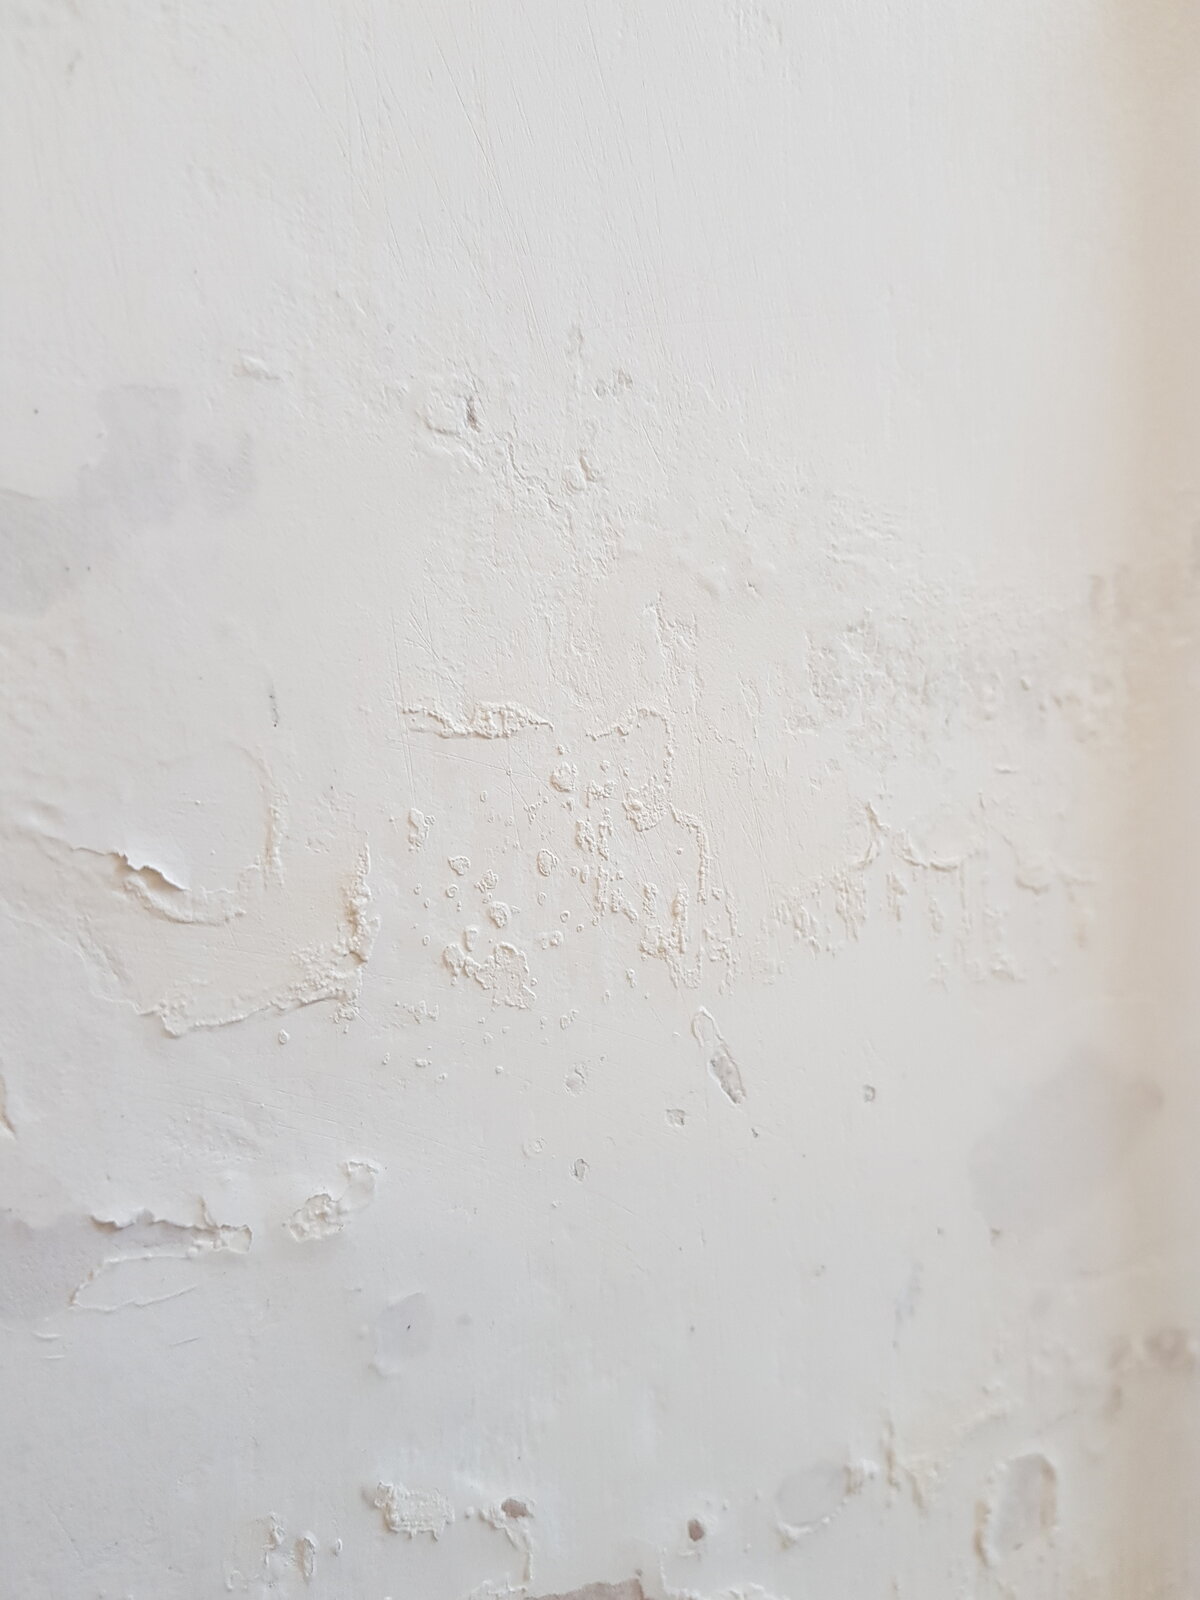 Efflorescence on internal wall, how to get rid of it? | DIYnot Forums